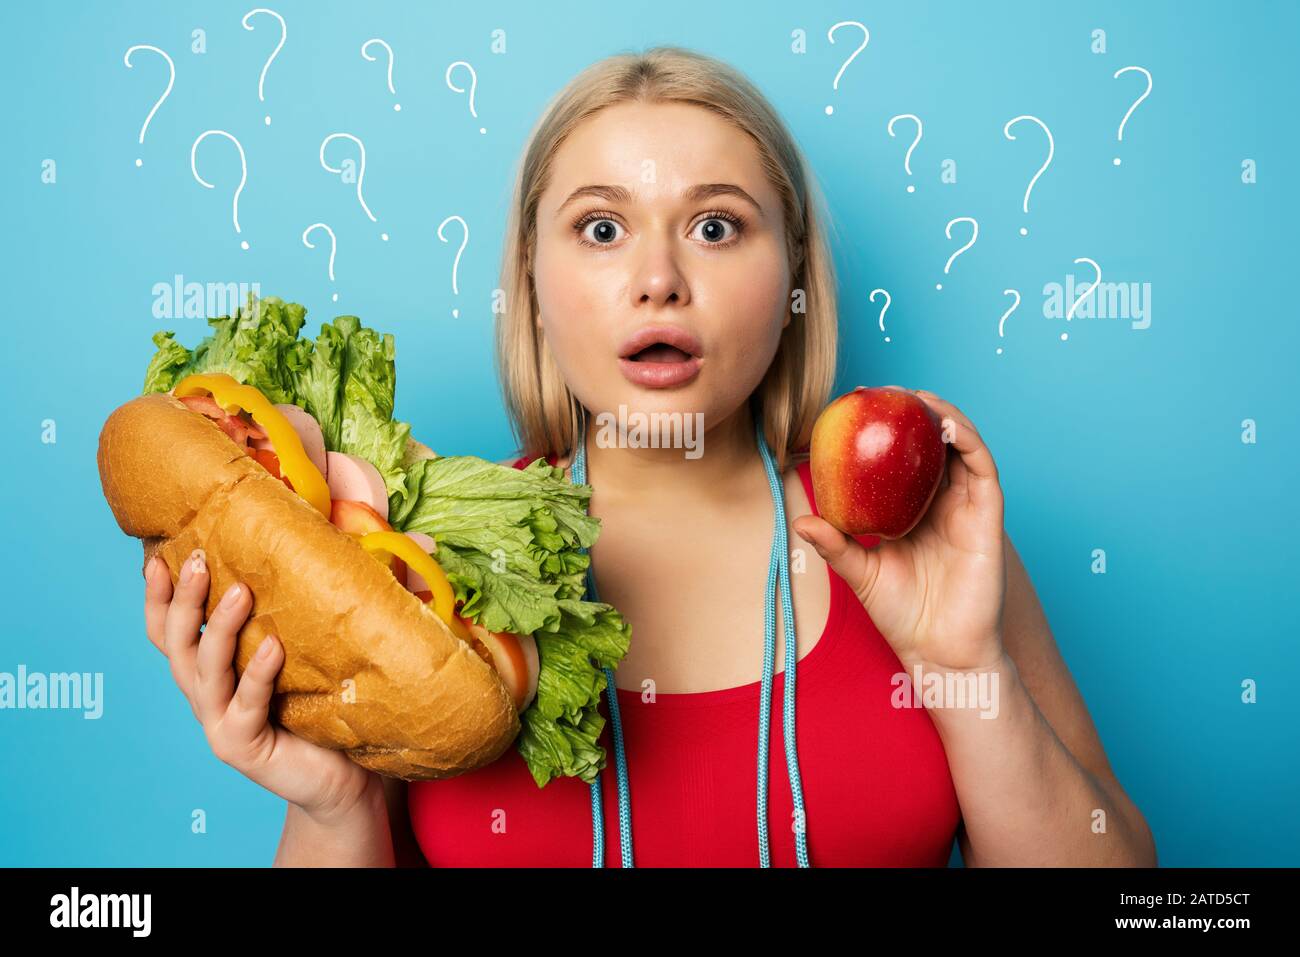 Fat girl does gym and want to eat a sandwich. Concept of indecision and doubt Stock Photo